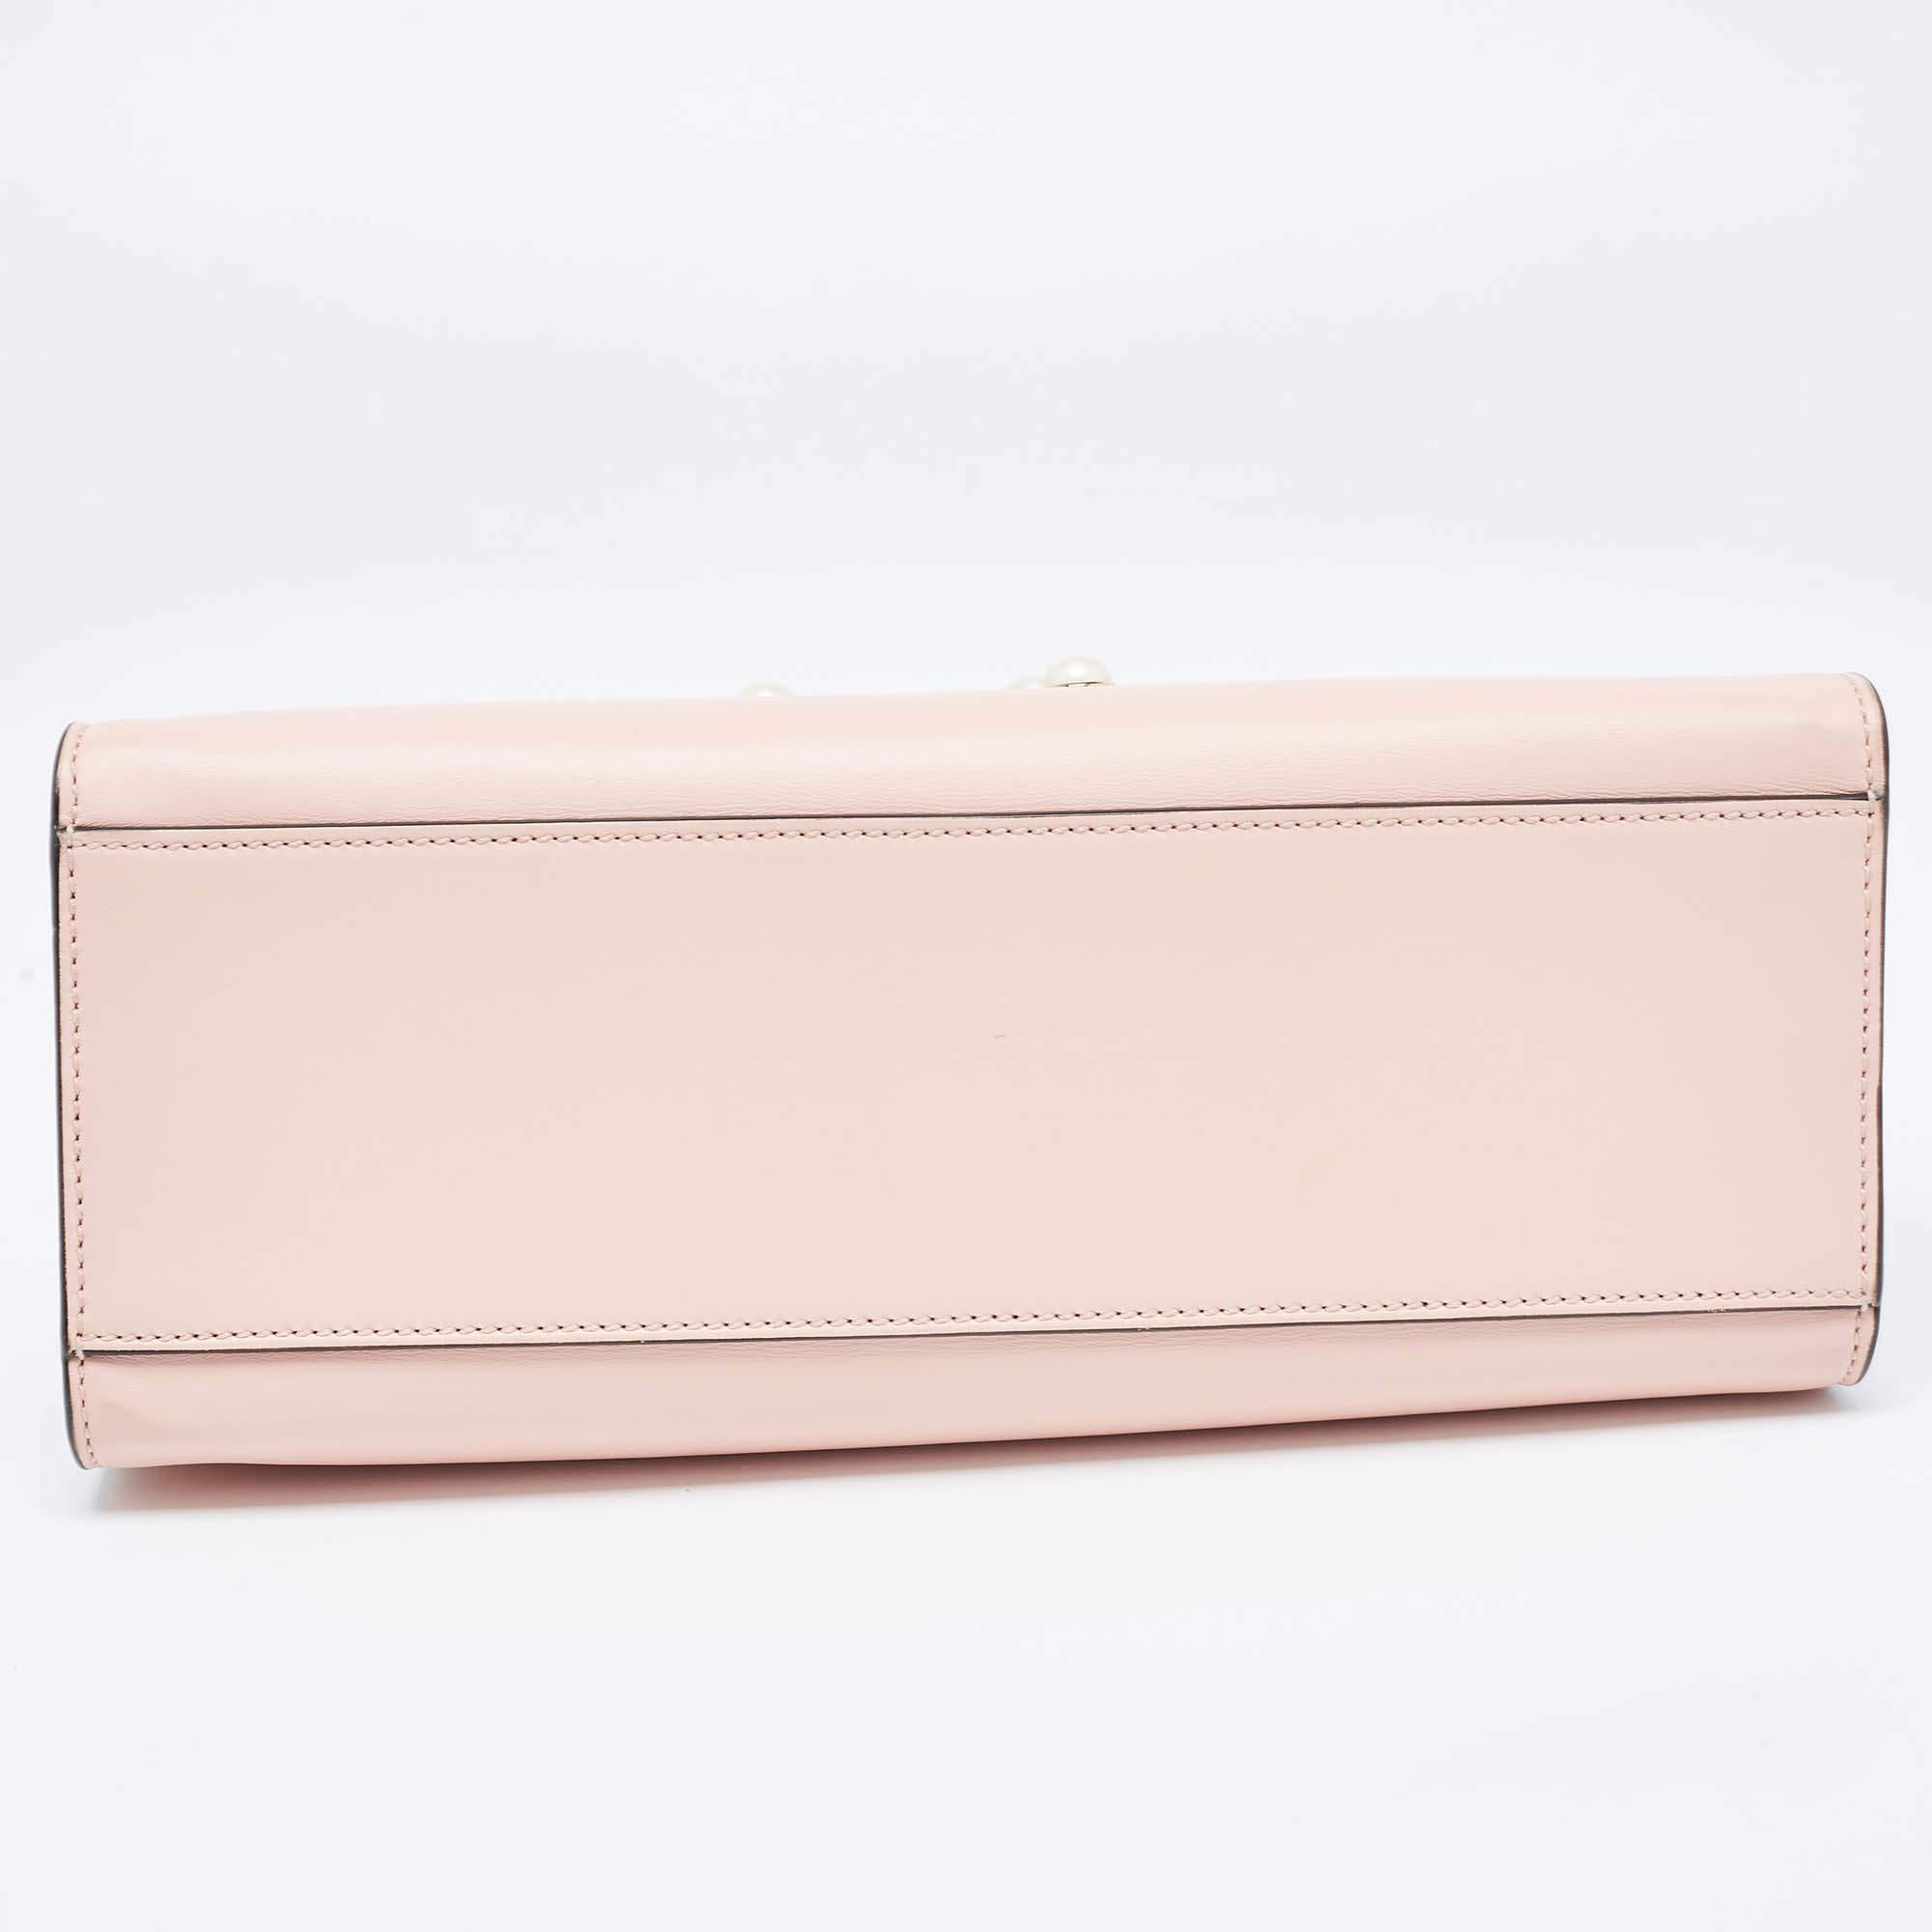 Gucci Pink/White Leather Small Bamboo Buckle Tote For Sale 6